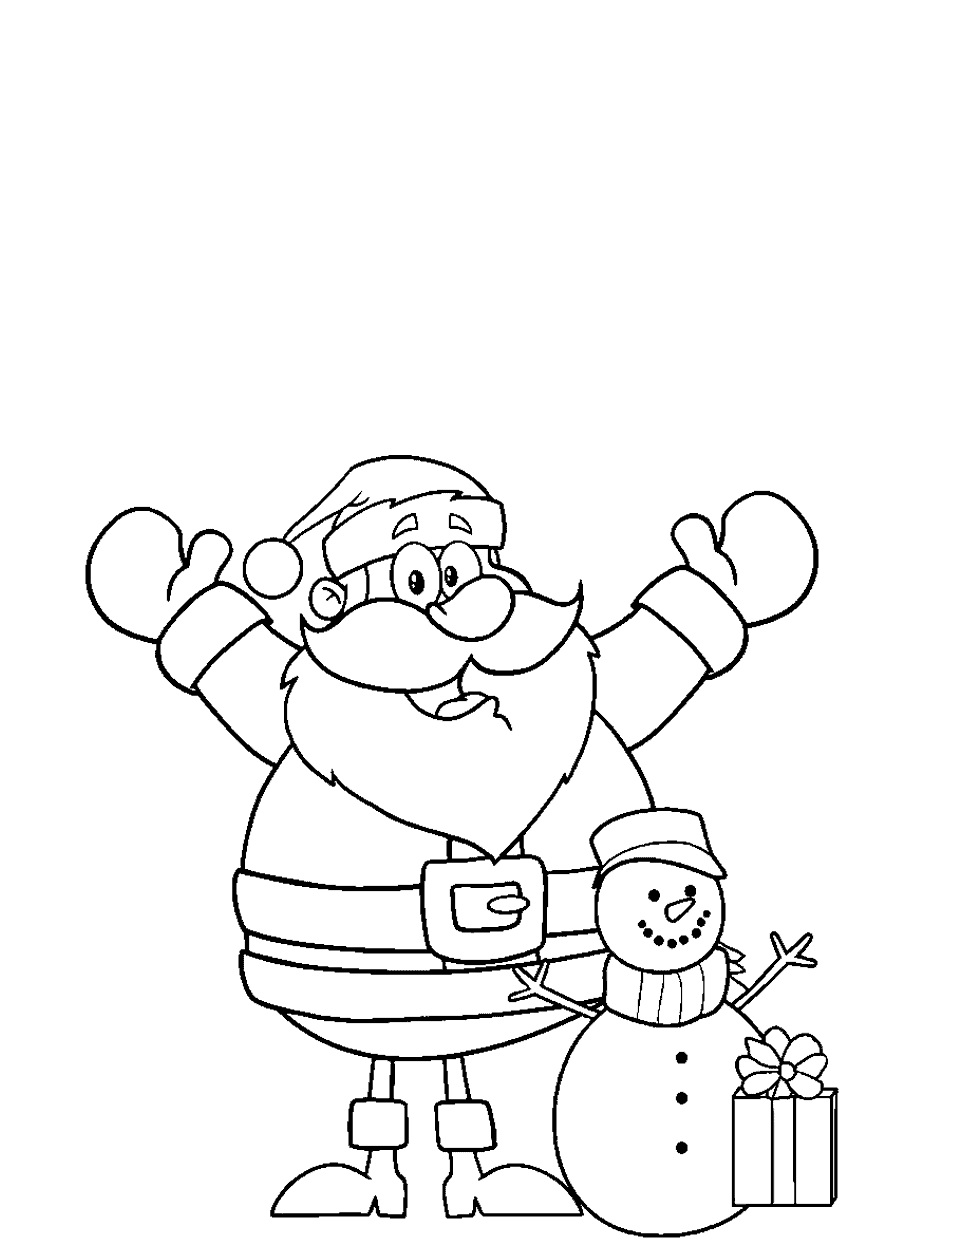 Santa and a Snowman Coloring Page - Santa Claus celebrating the snowman he made.